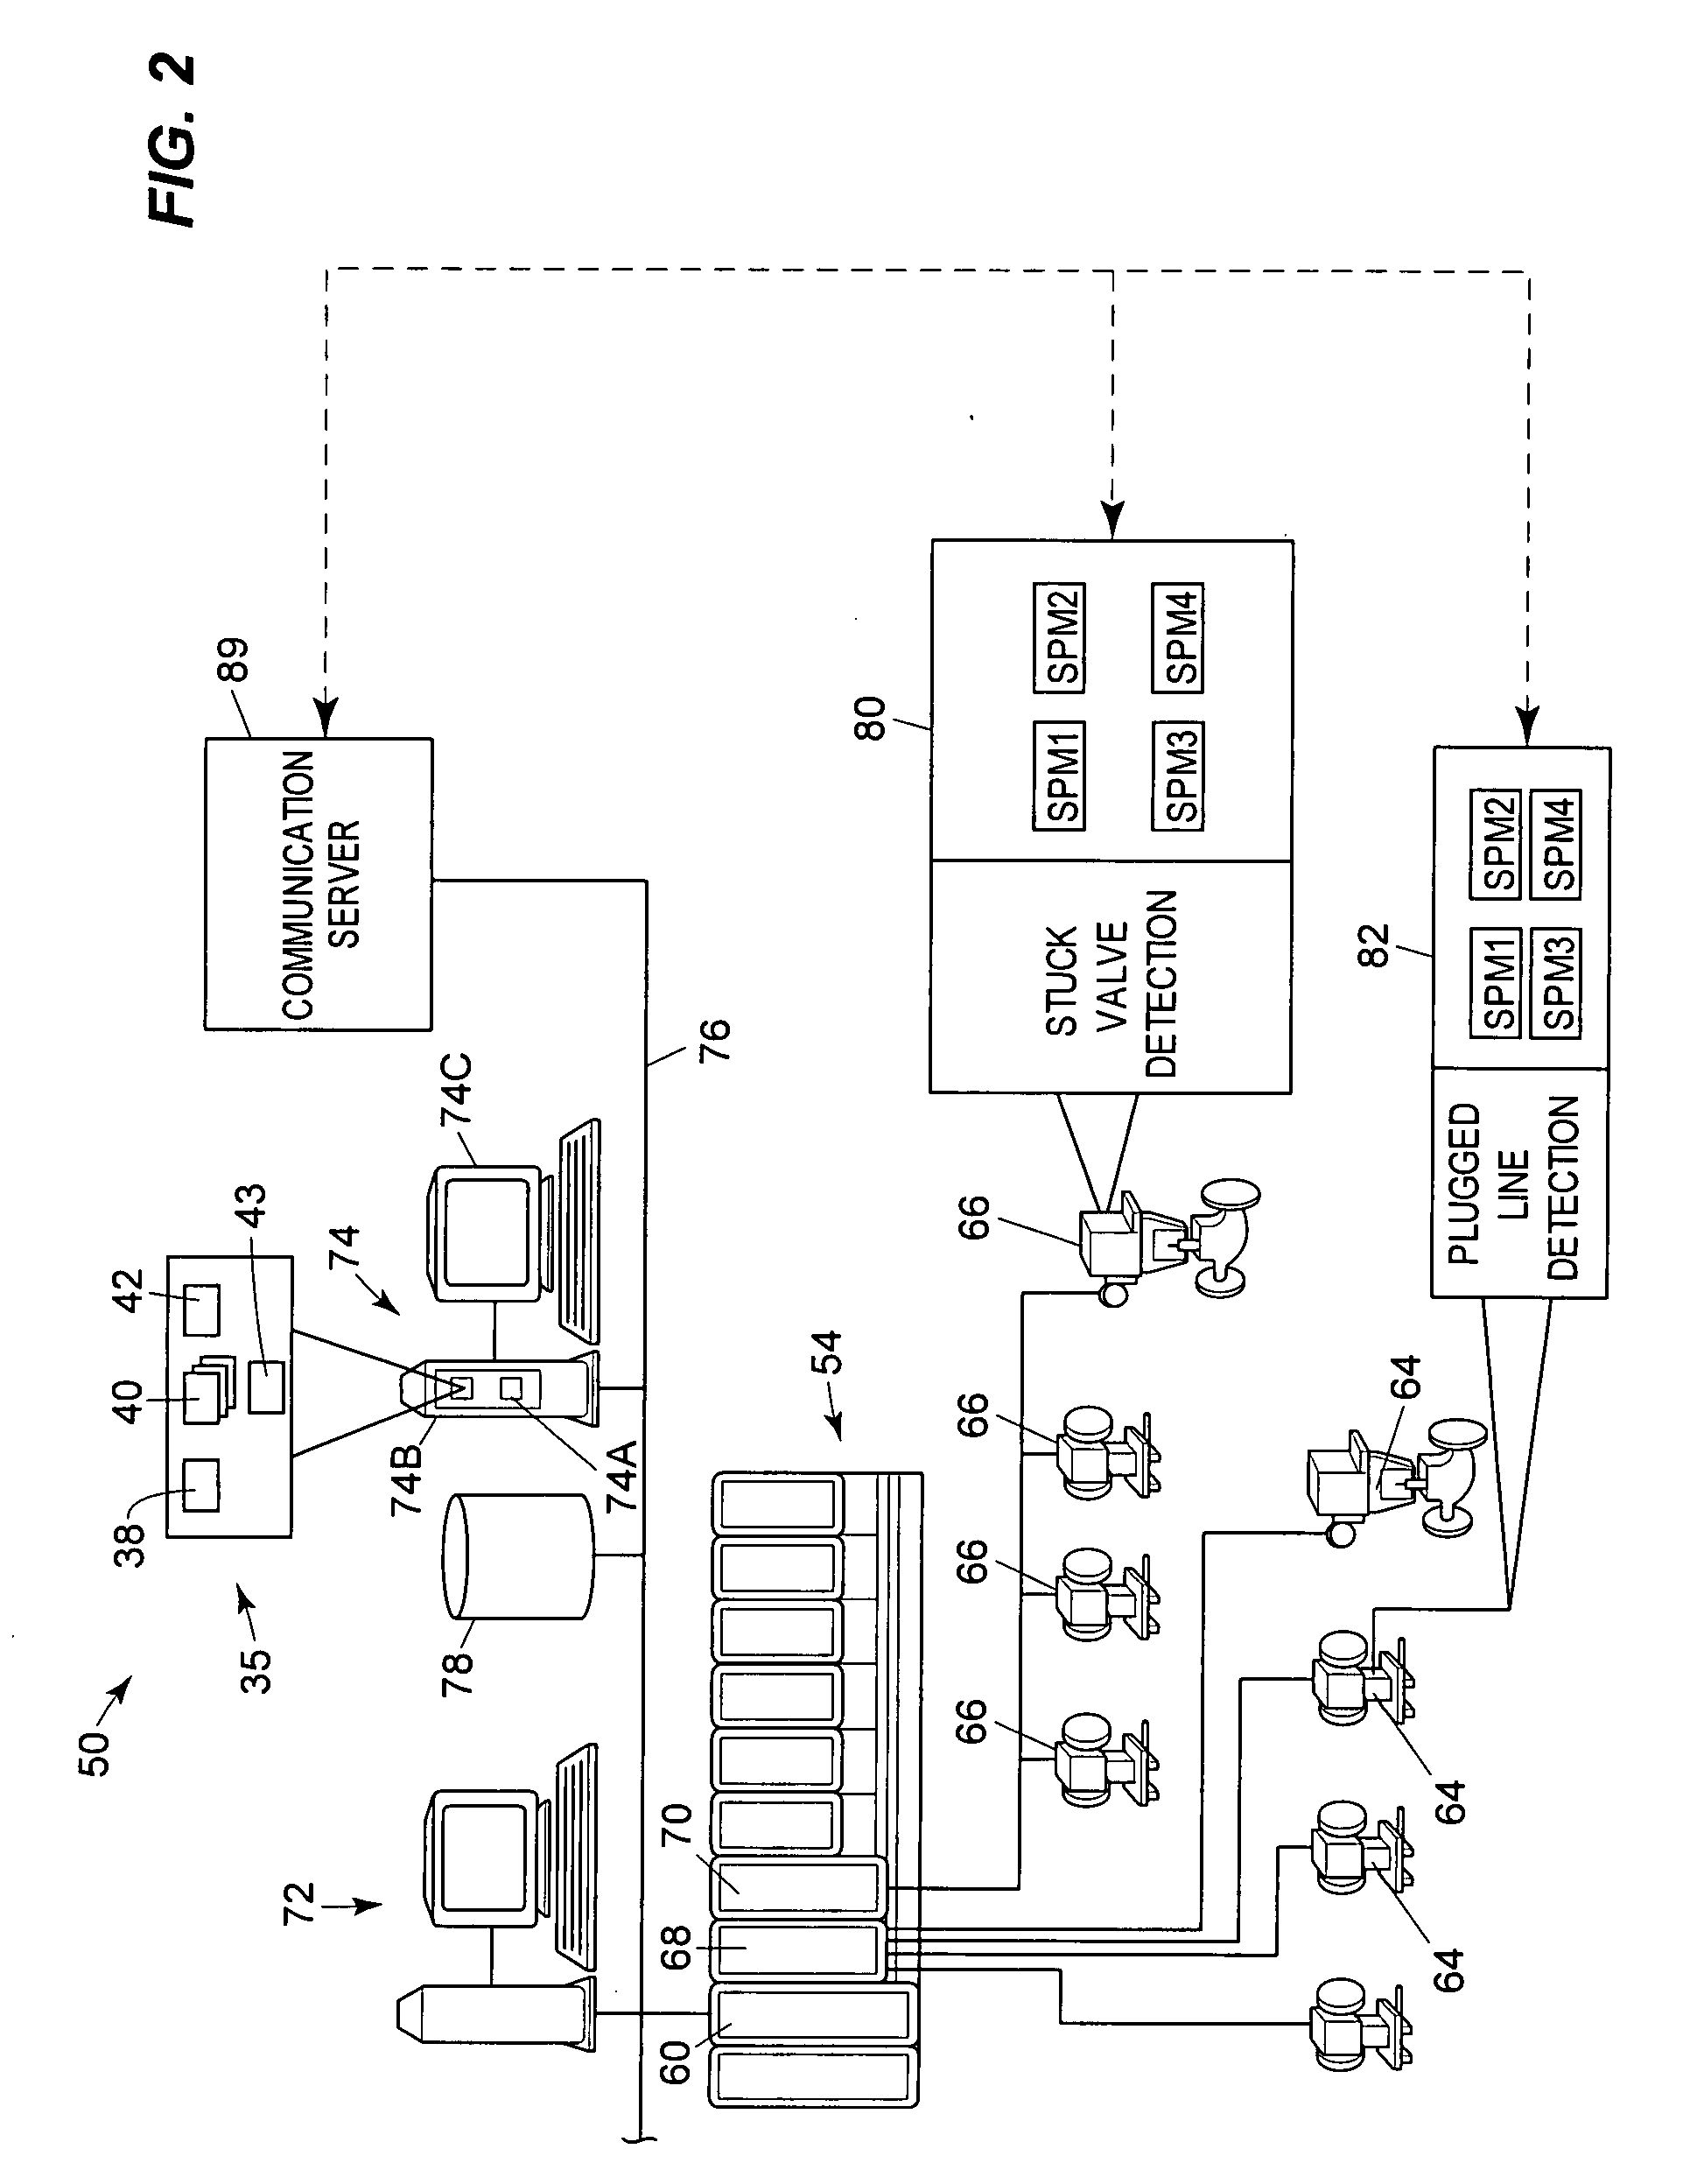 Multivariate monitoring and diagnostics of process variable data